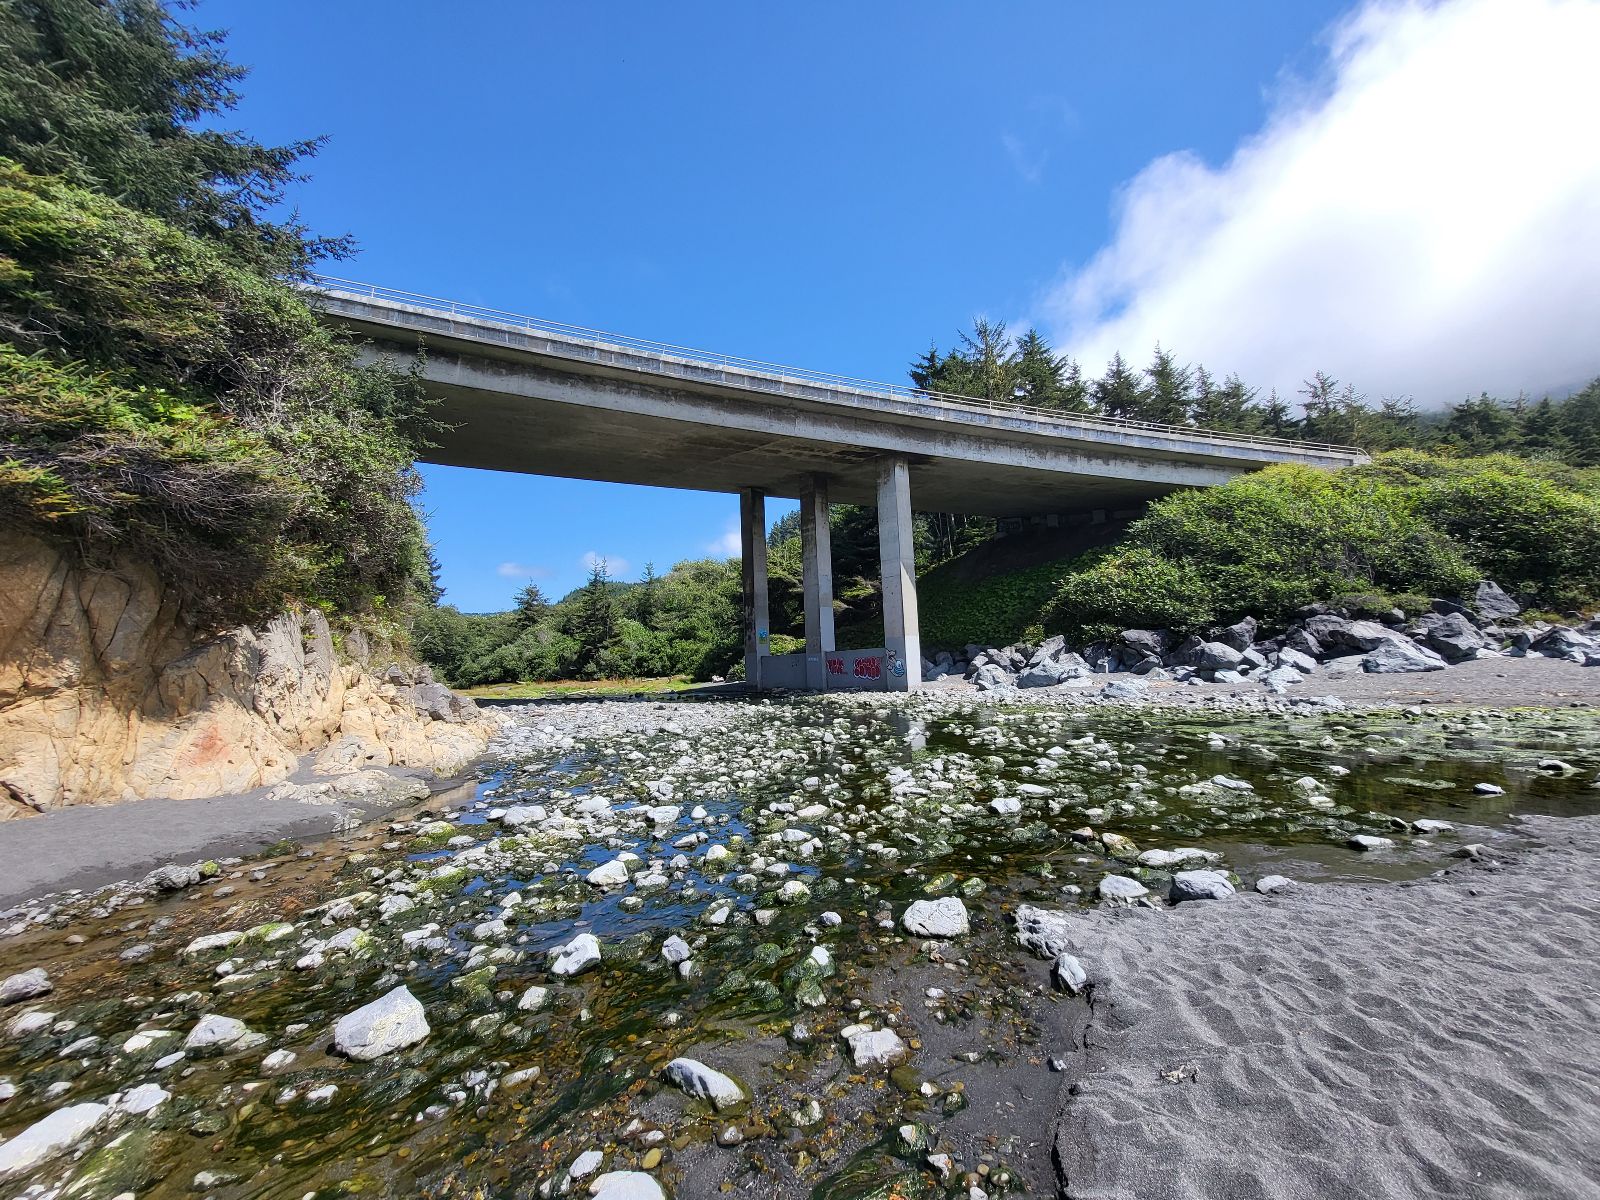 The highway bridge that goes over Wilson Creek and the sand at DeMartin Beach Picnic Area